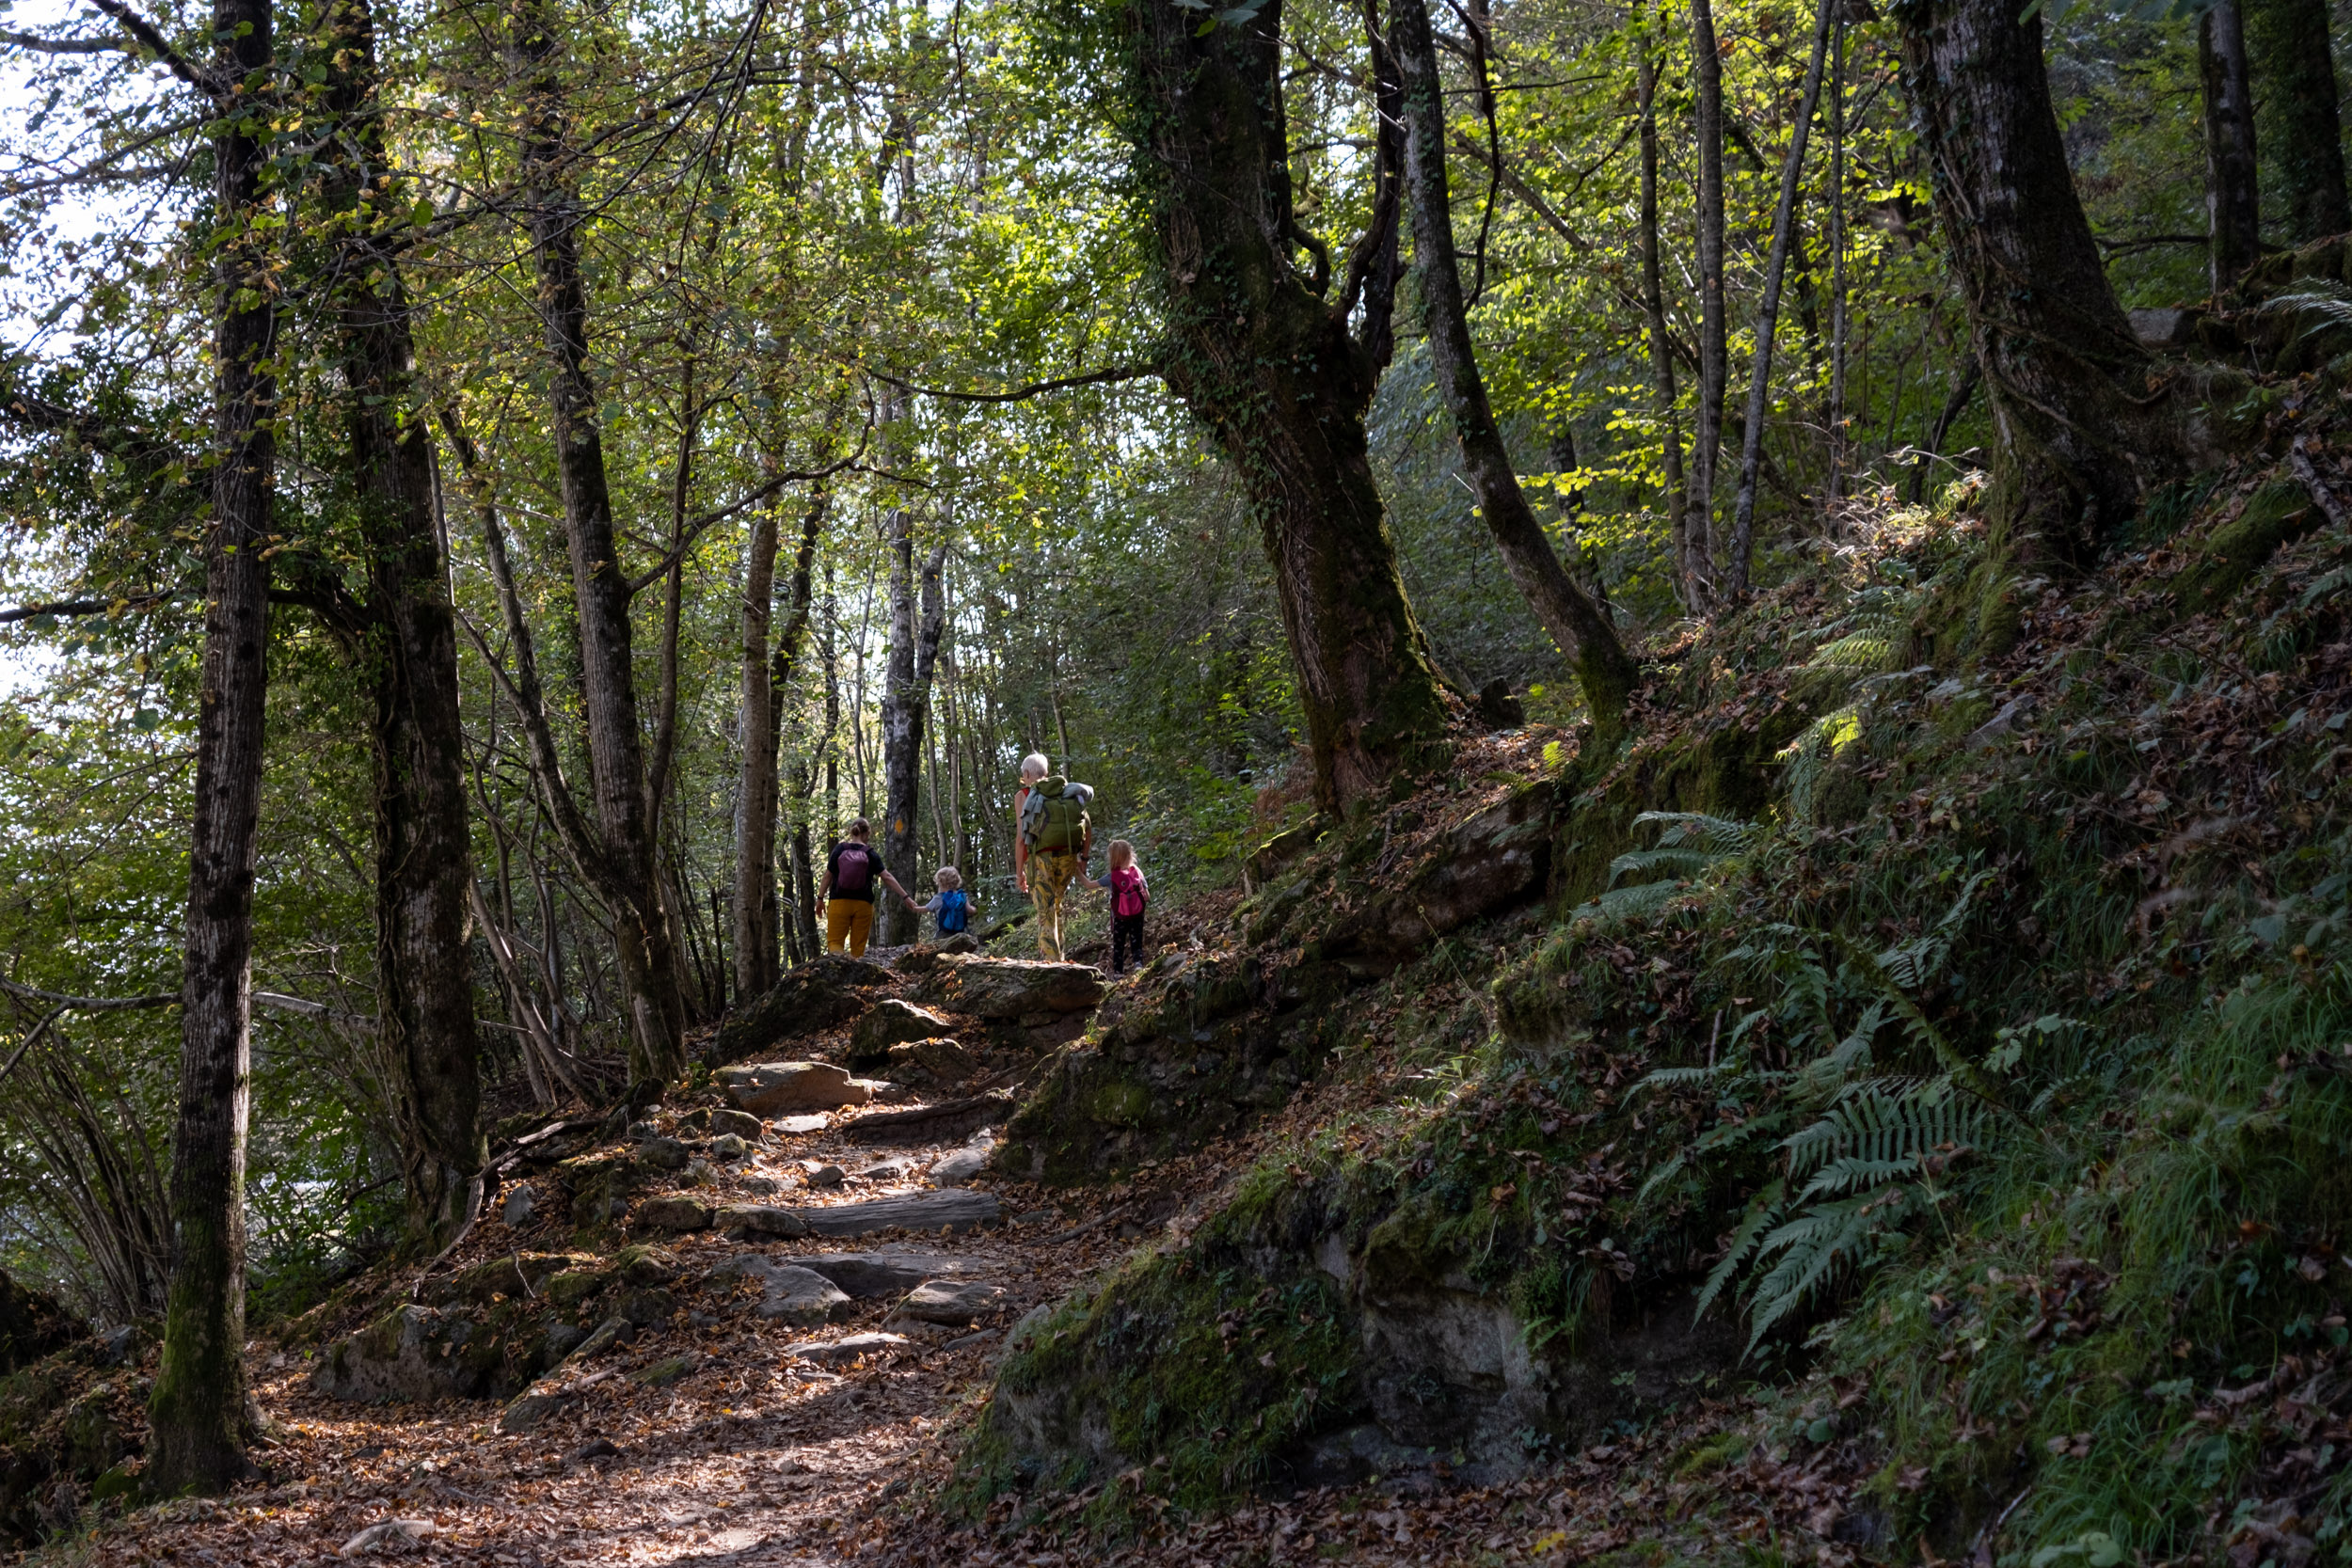 Hike through the woods in Maggia Valley, from Giumaglio to Mogeghno.